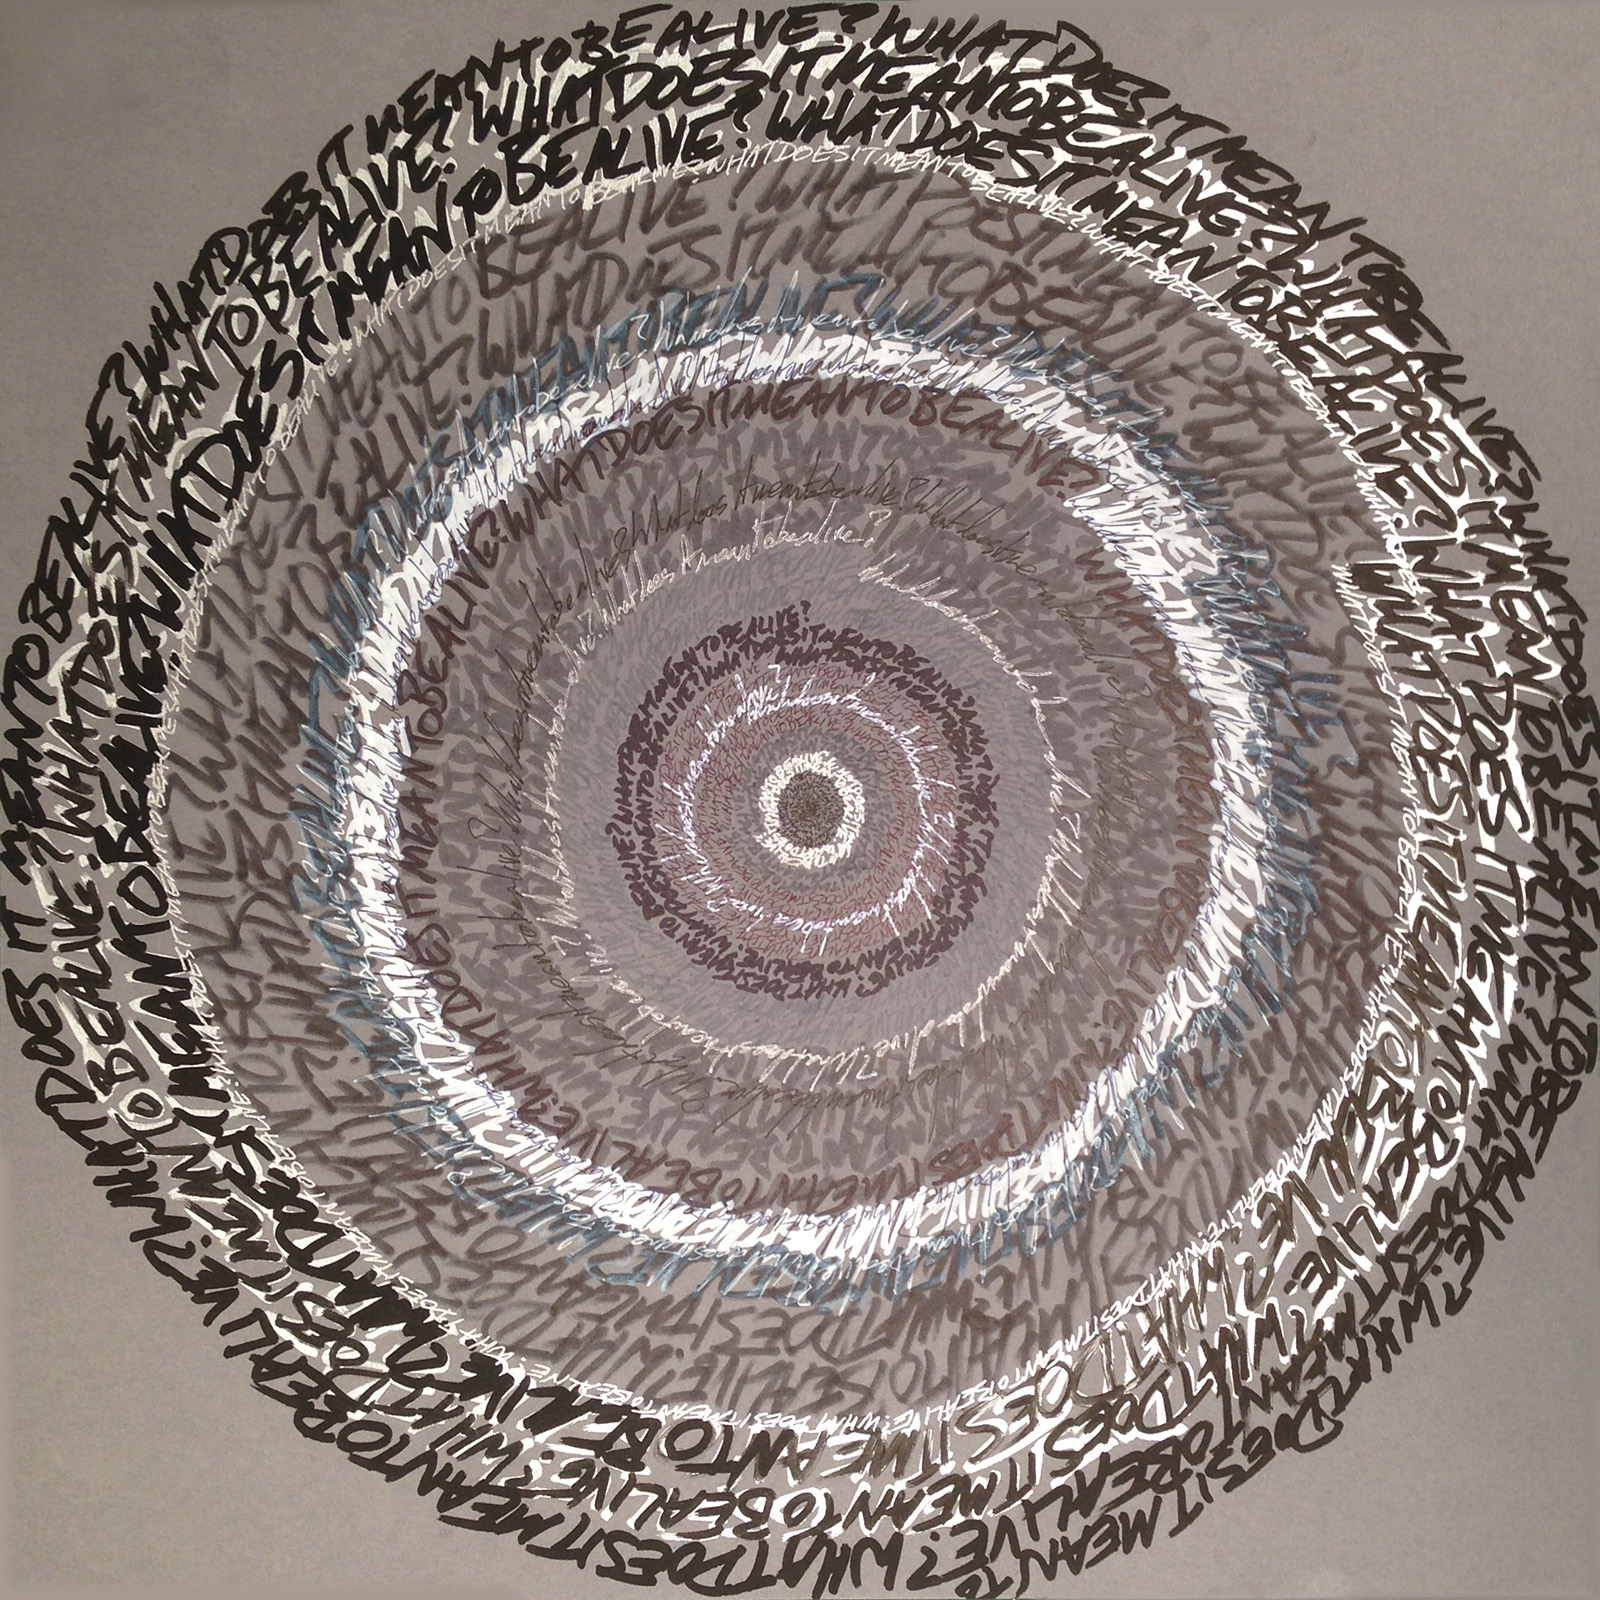 "Energy Spiral—What Does It Mean To Be Alive? #4", 2014, pen and marker on paper, 17in. x 17in.